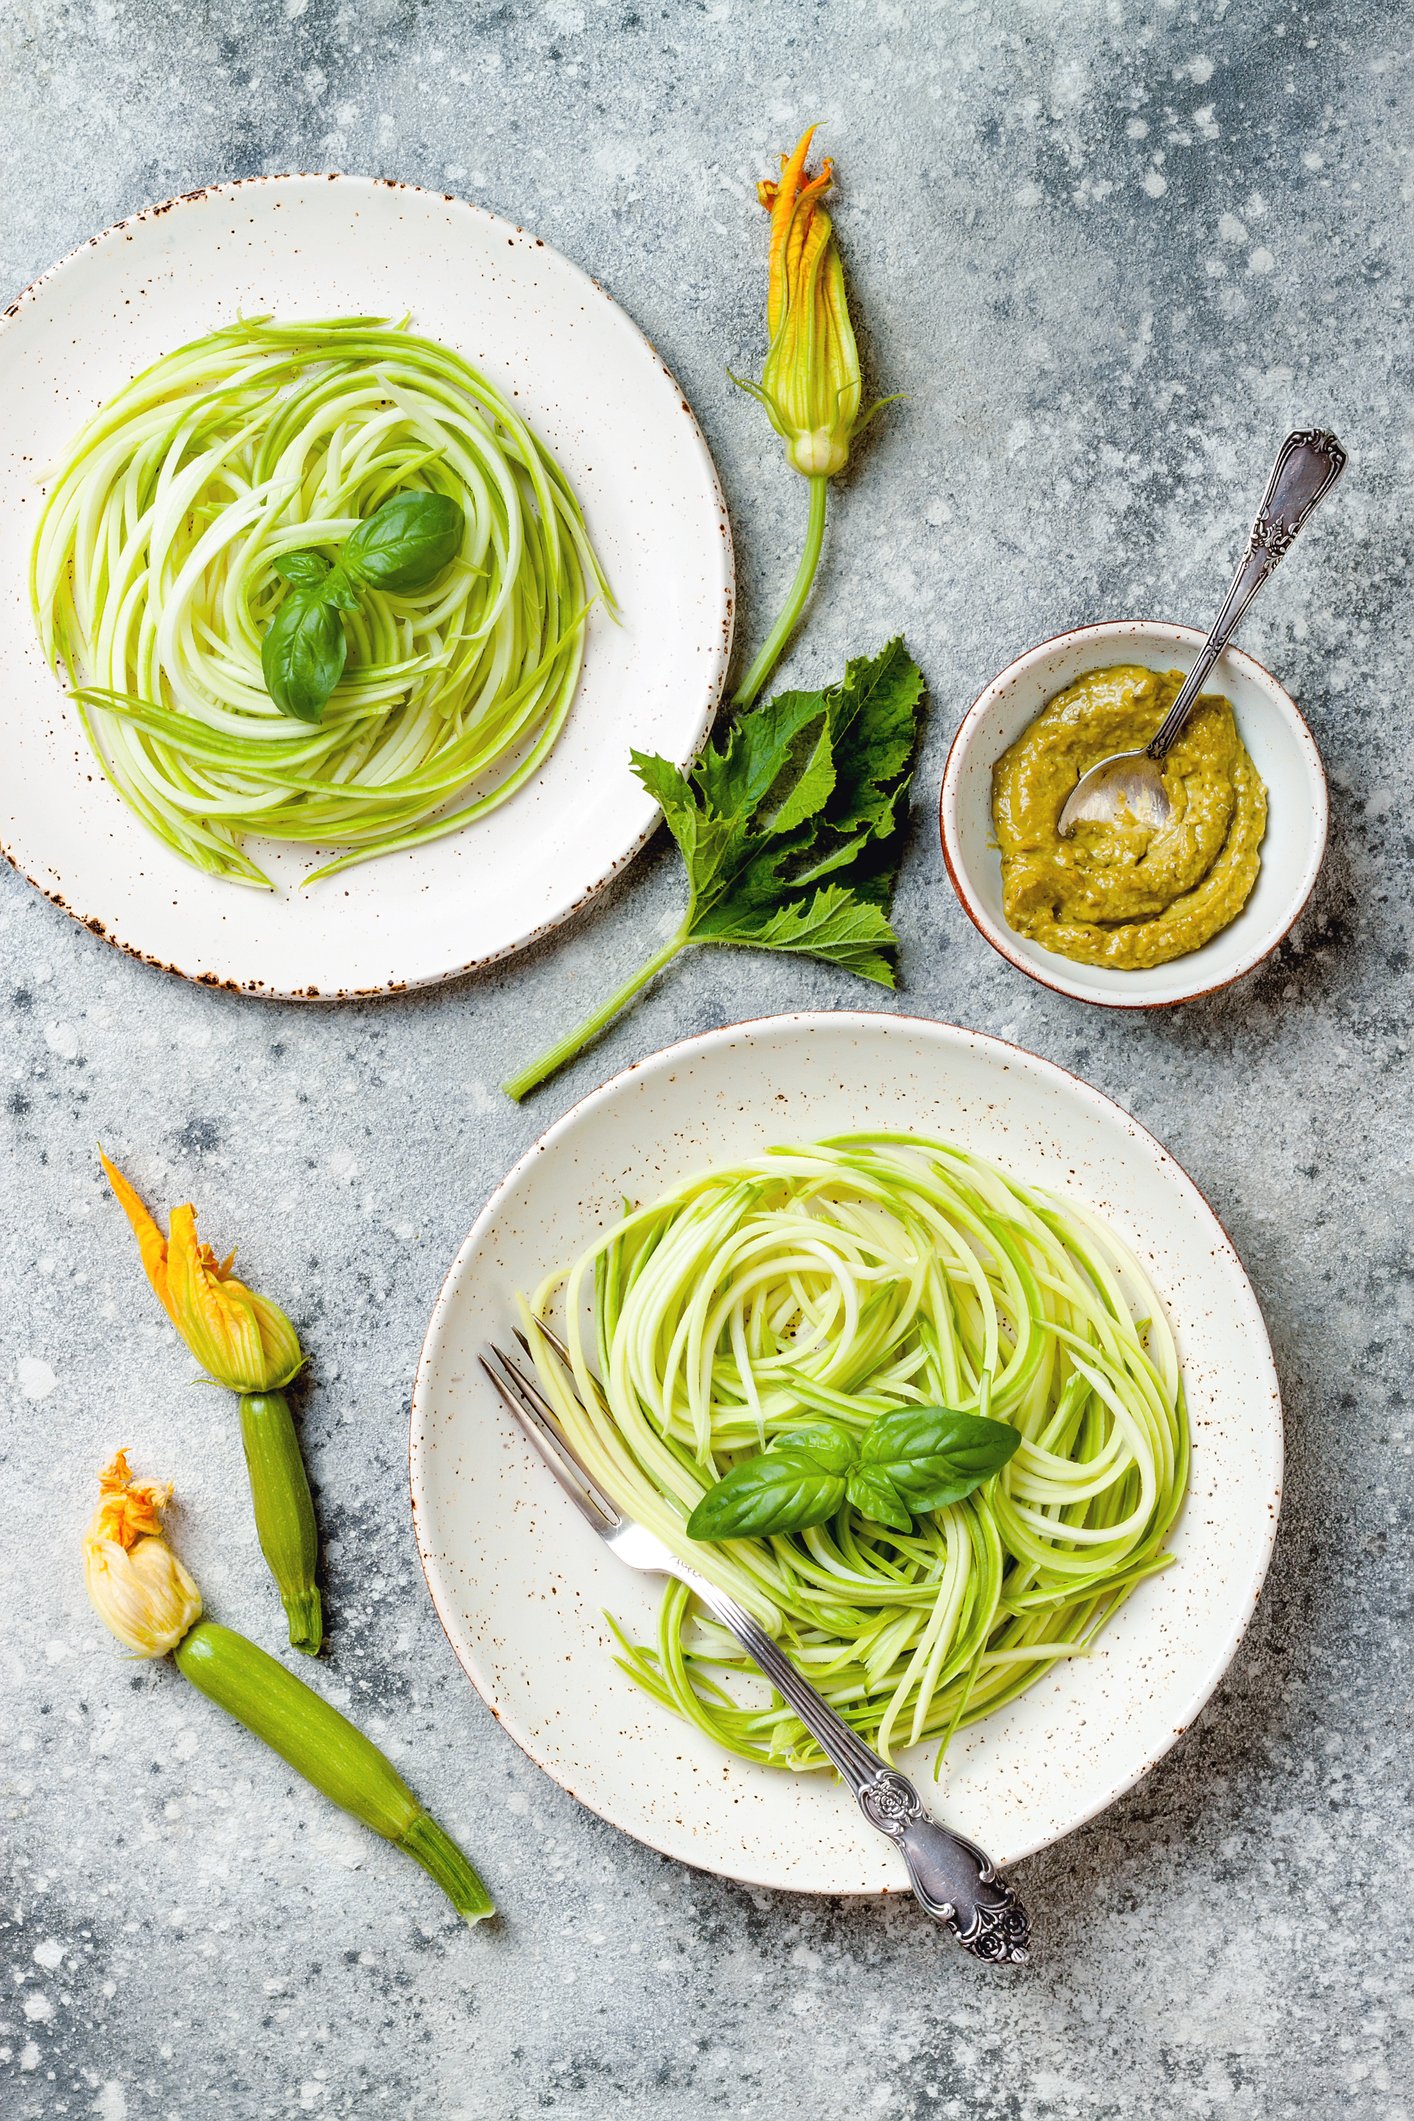 Zucchini spaghetti, or zoodles, for short, is a great low-carb alternative to regular pasta. (iStock Photo)